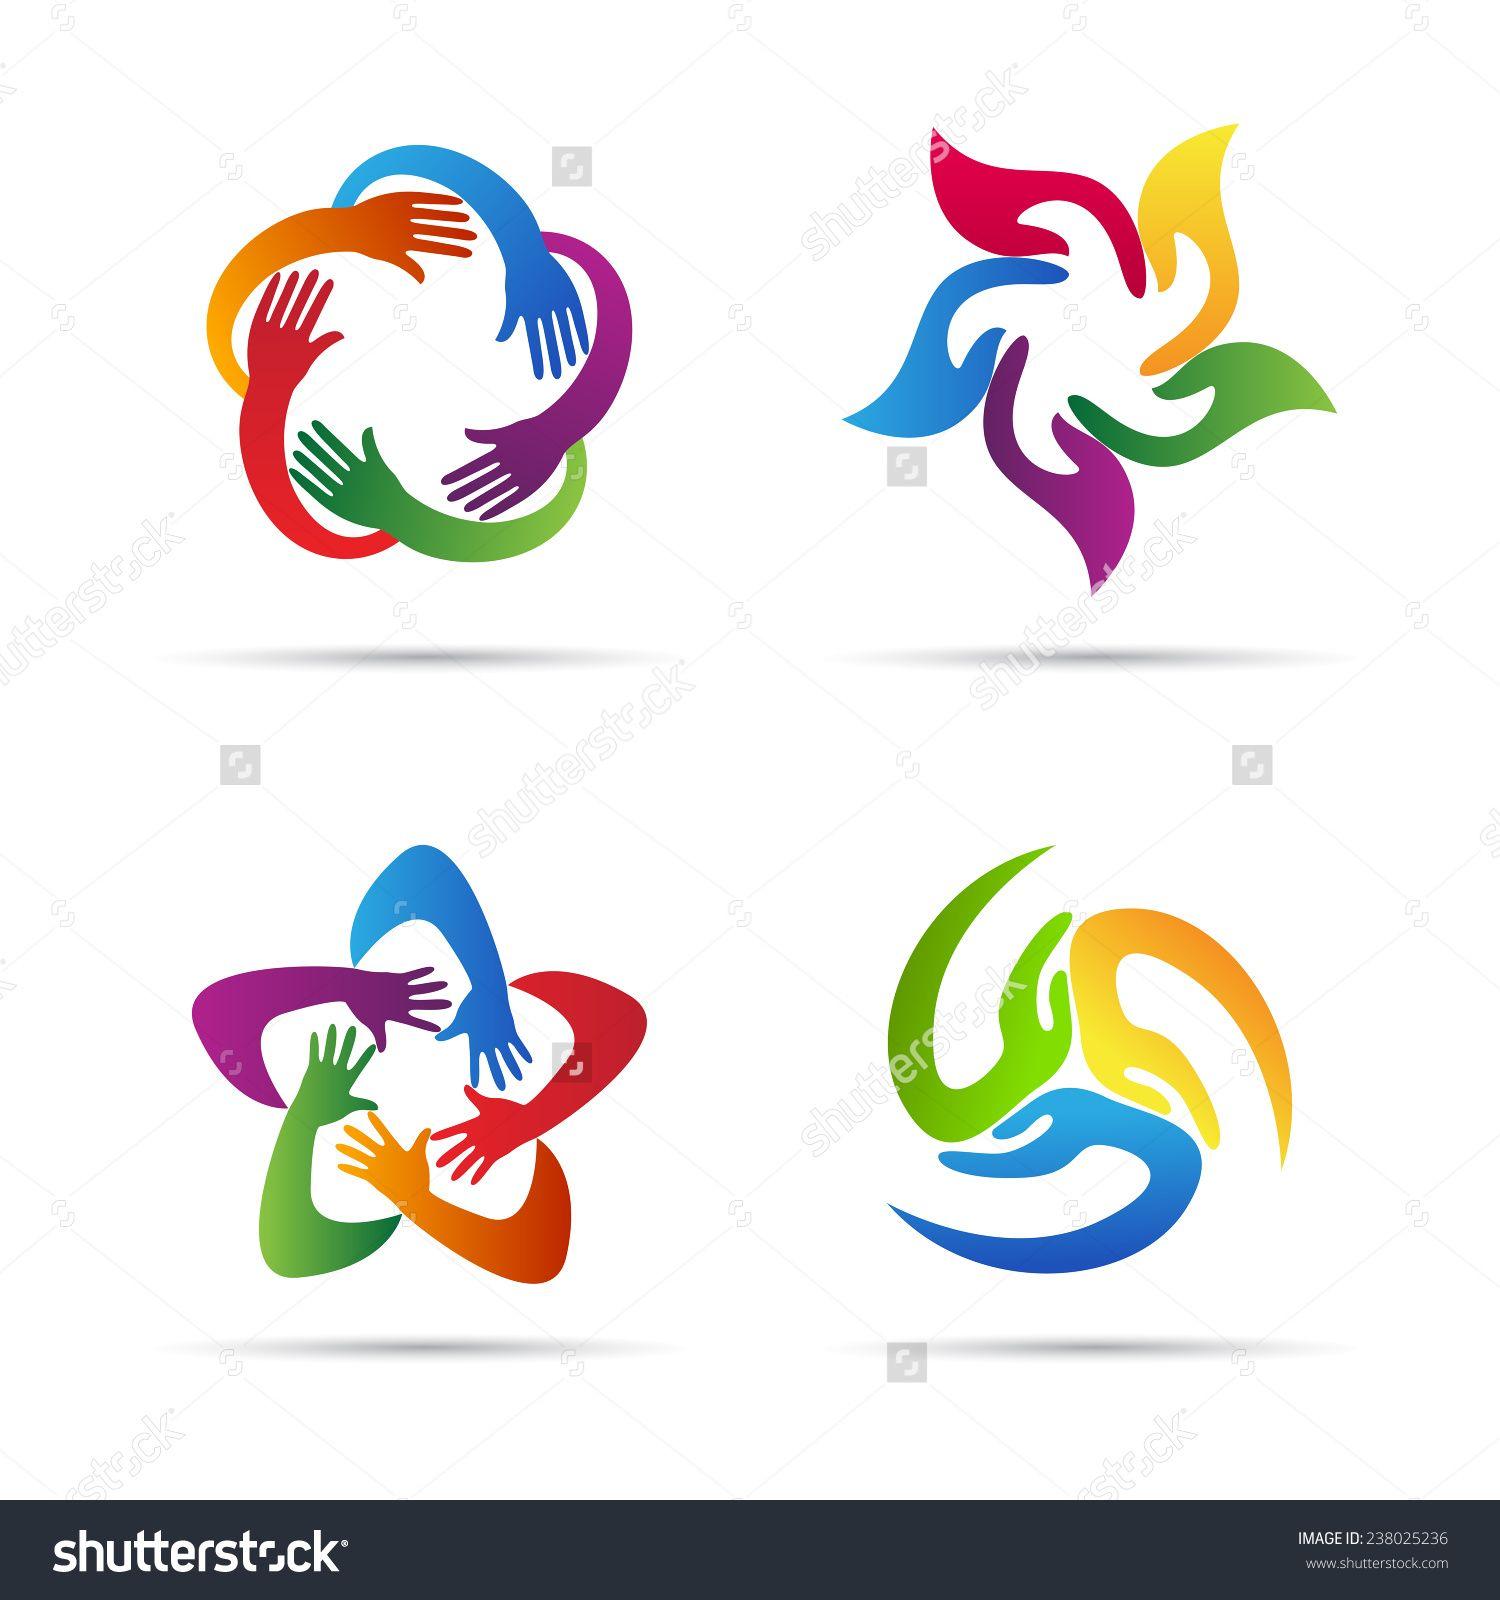 Abstract Hand Logo - Abstract Hands Vector Design Represents Teamwork, Unity, Signs And ...